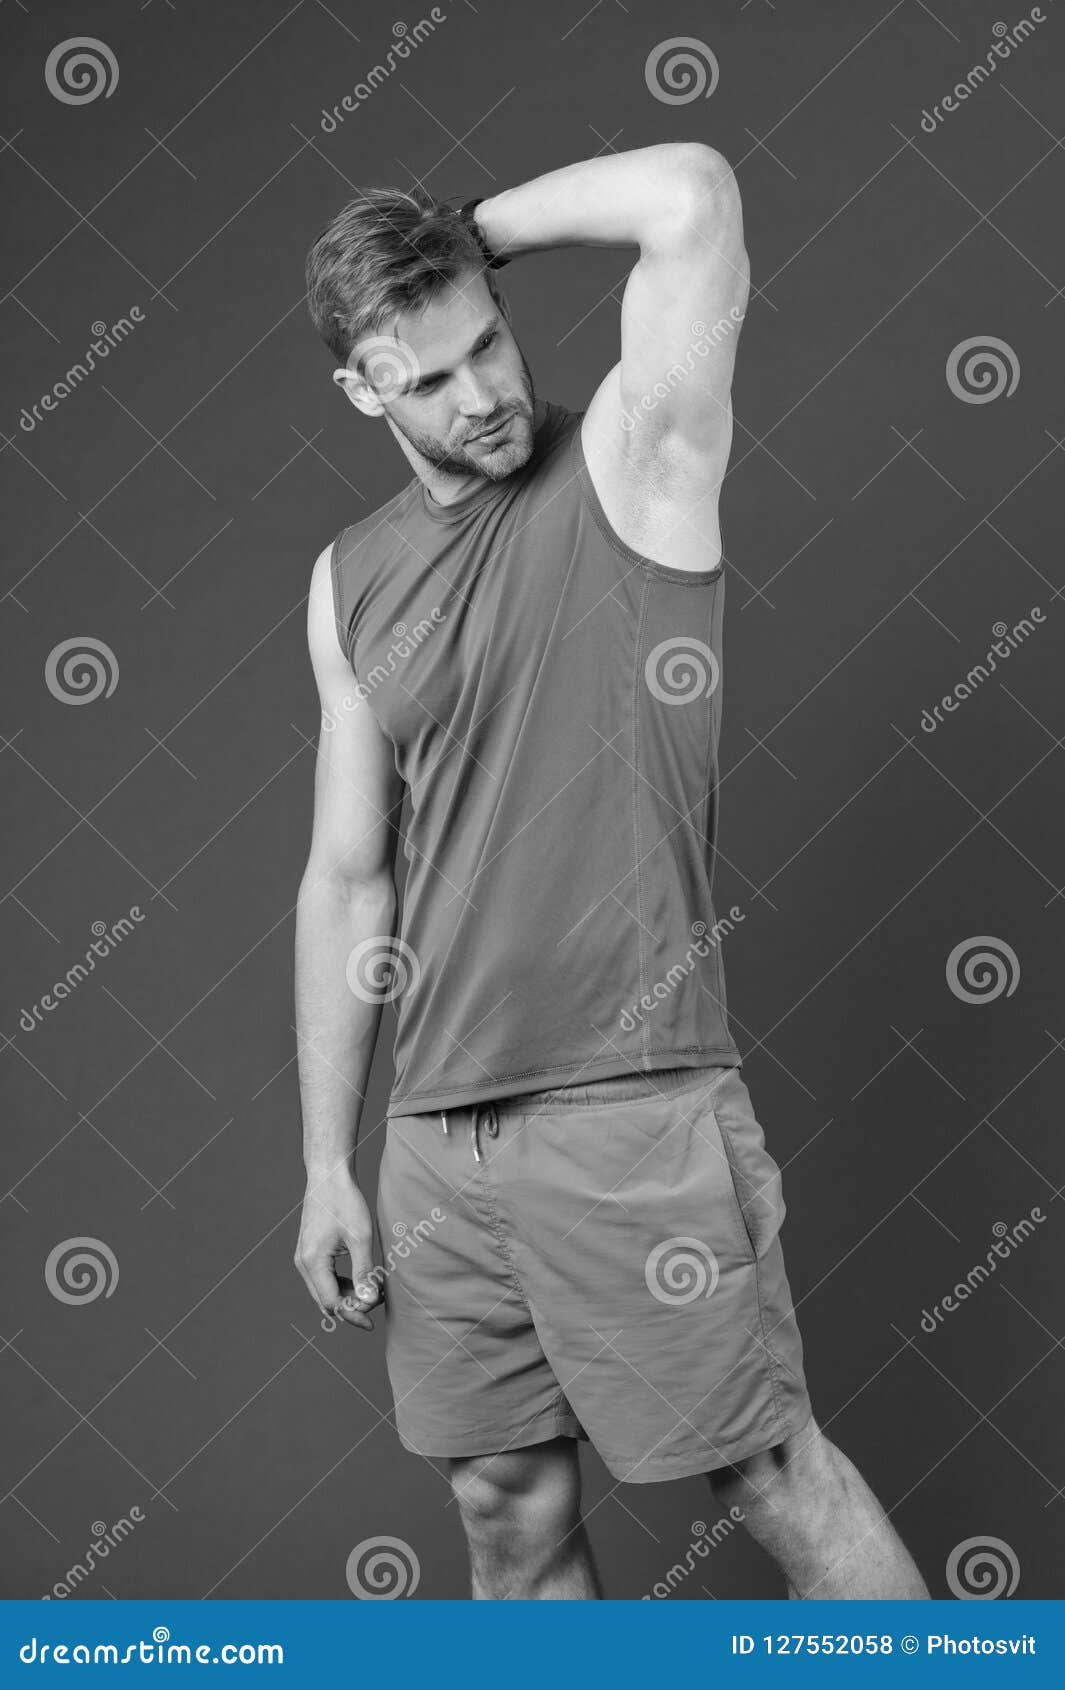 man confident in his antiperspirant. guy checks dry armpit satisfied with healthy skin. prevent, reduce perspiration. no